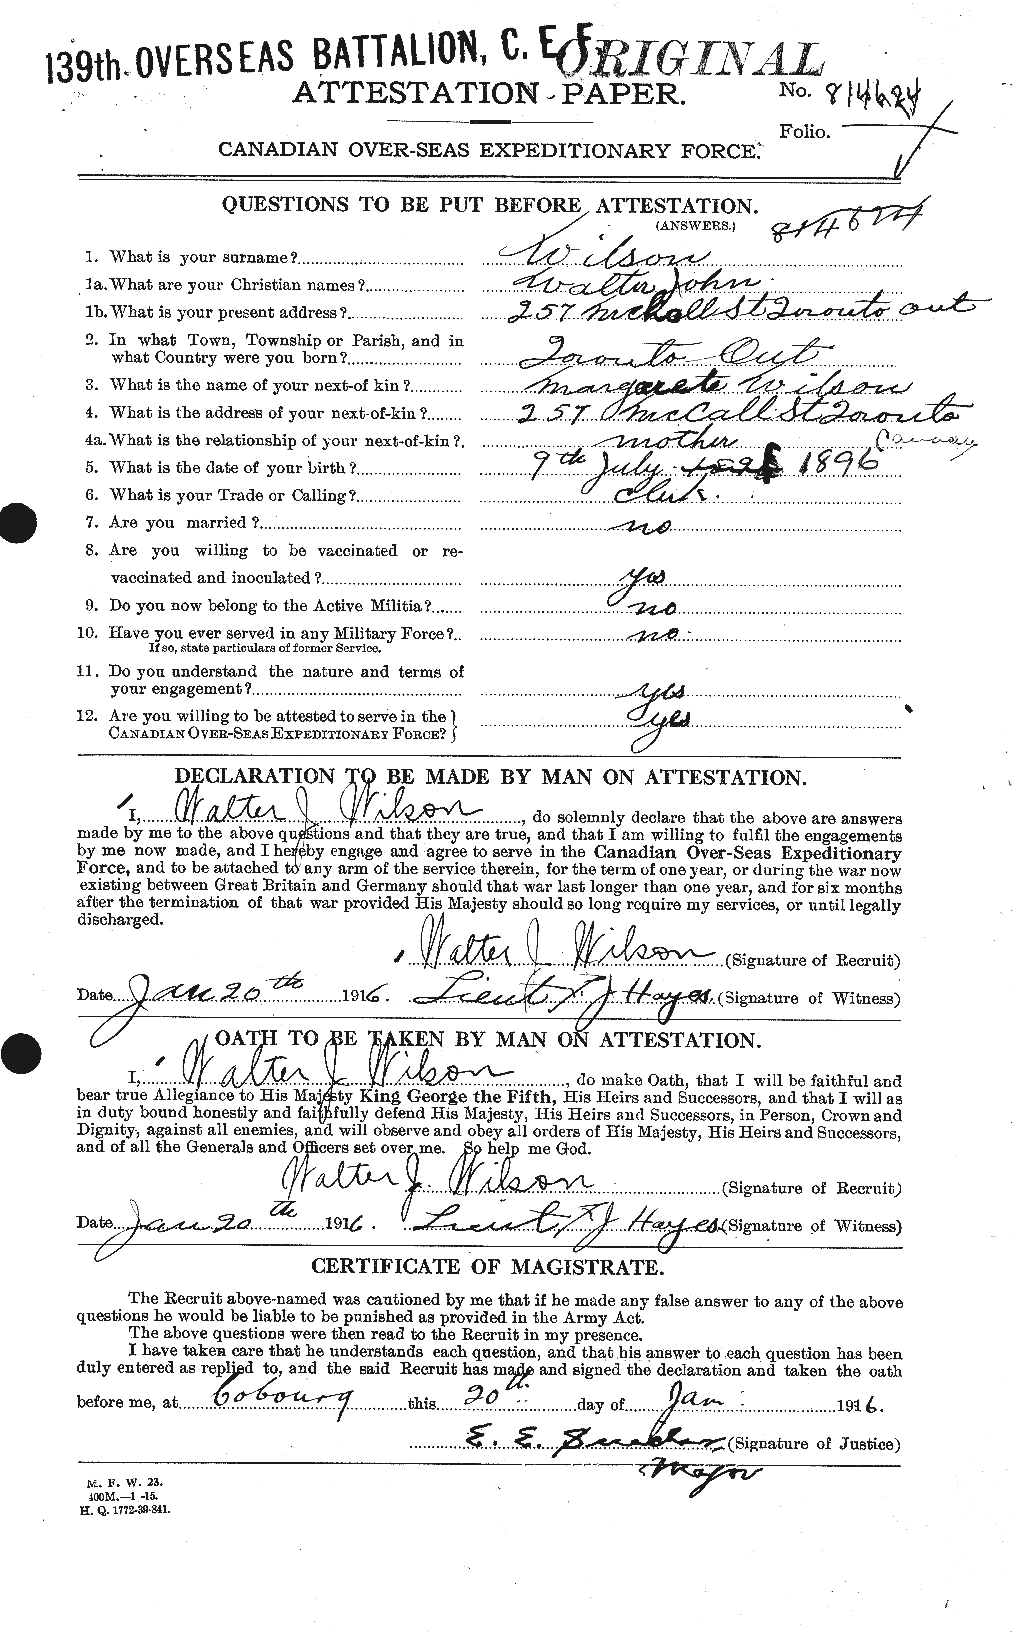 Personnel Records of the First World War - CEF 681758a